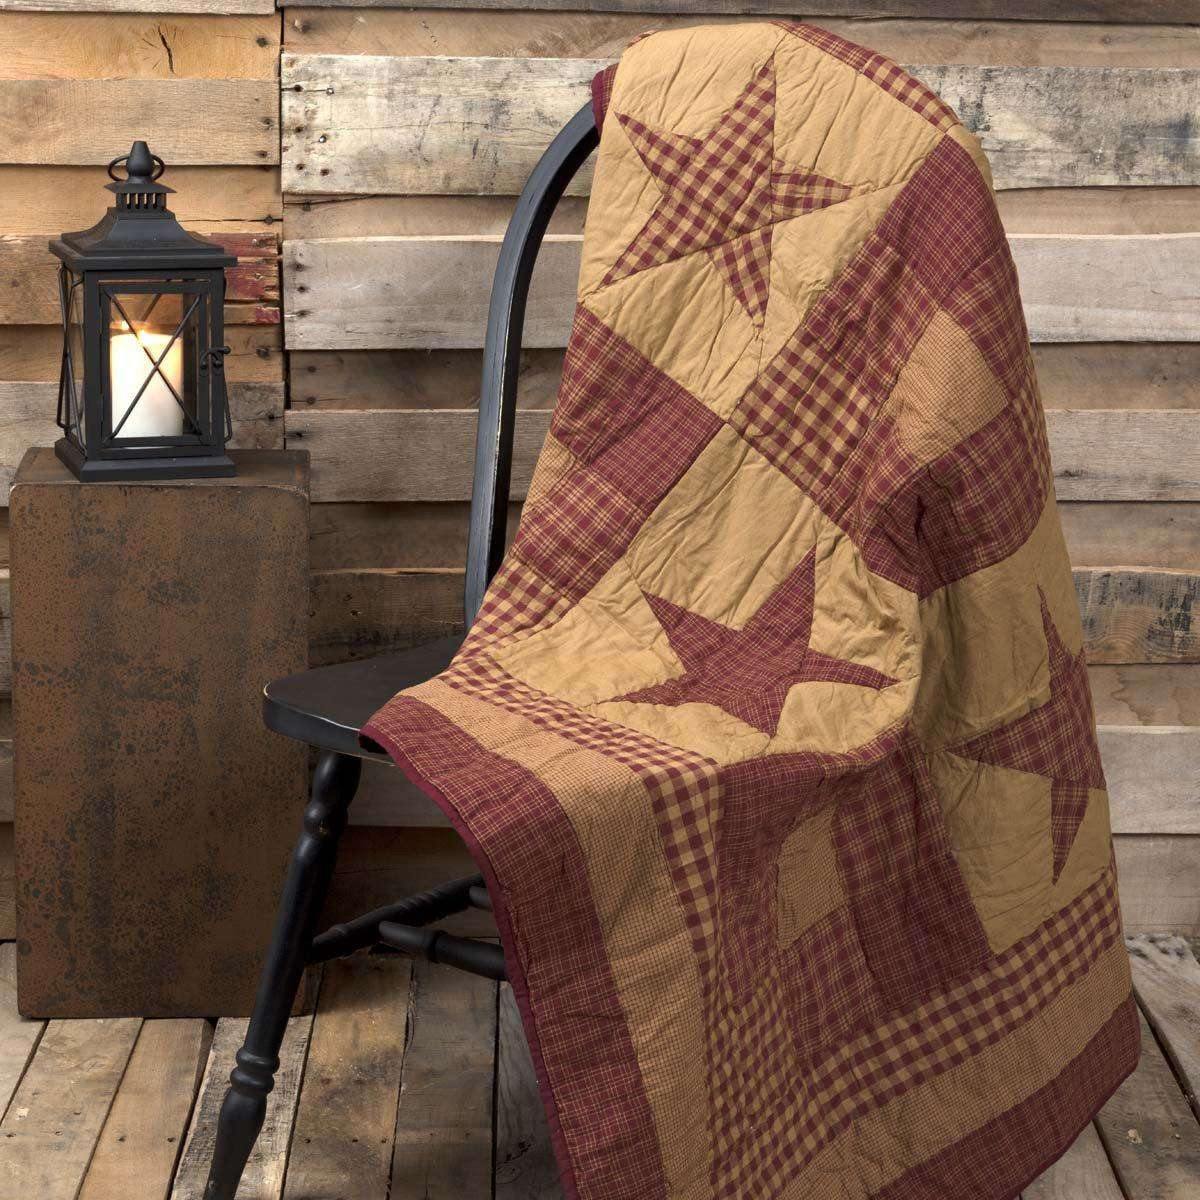 Ninepatch Star Quilted Throw 60x50  VHC Brands